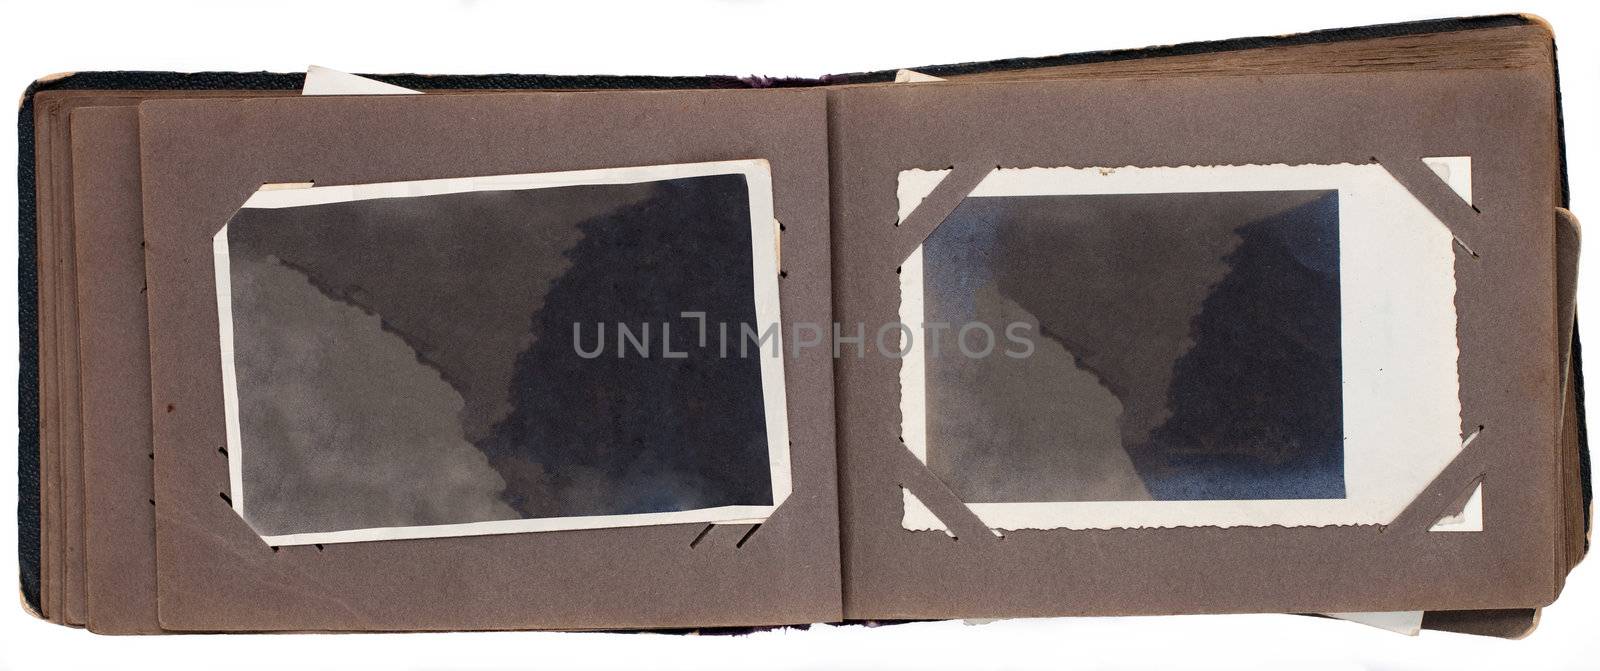 Vintage photo album isolated with clipping path on white background